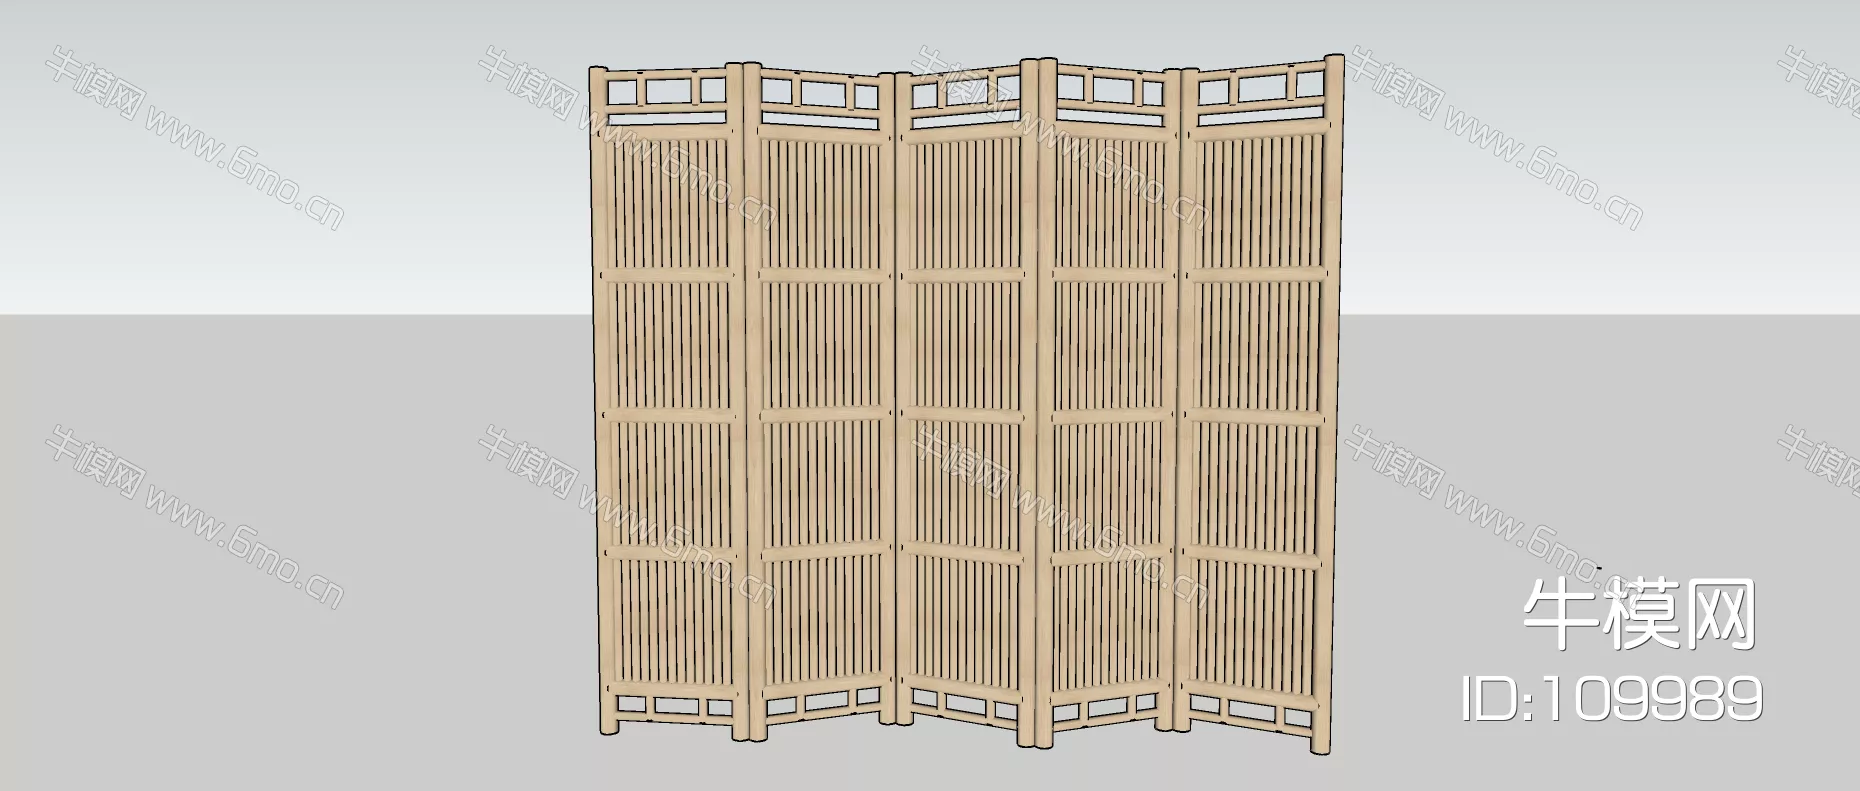 CHINESE PARTITION SCREEN - SKETCHUP 3D MODEL - ENSCAPE - 109989